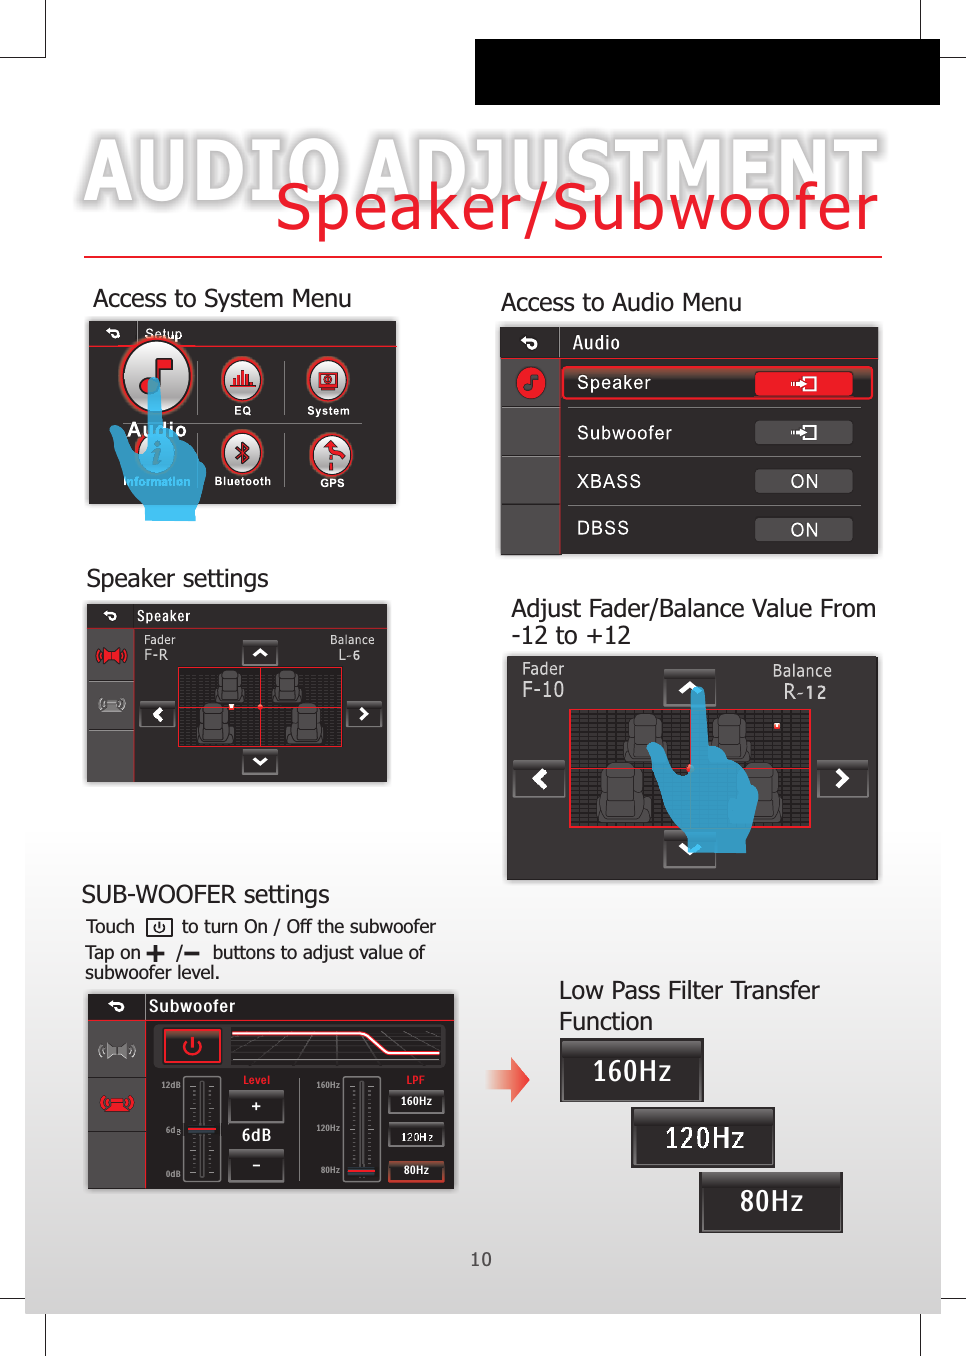 AUDIO ADJUSTMENTSpeaker/SubwooferSpeaker settingsAdjust Fader/Balance Value From -12 to +12Access to Audio MenuAccess to System Menu1080HzTouch        to turn On / Off the subwoofer Tap on      /     buttons to adjust value of subwoofer level.SUB-WOOFER settingsLow Pass Filter Transfer Function160Hz120Hz0dB 80Hz80HzSubwooferLevel6dB12dB LPF160Hz160Hz120Hz120Hz6dB